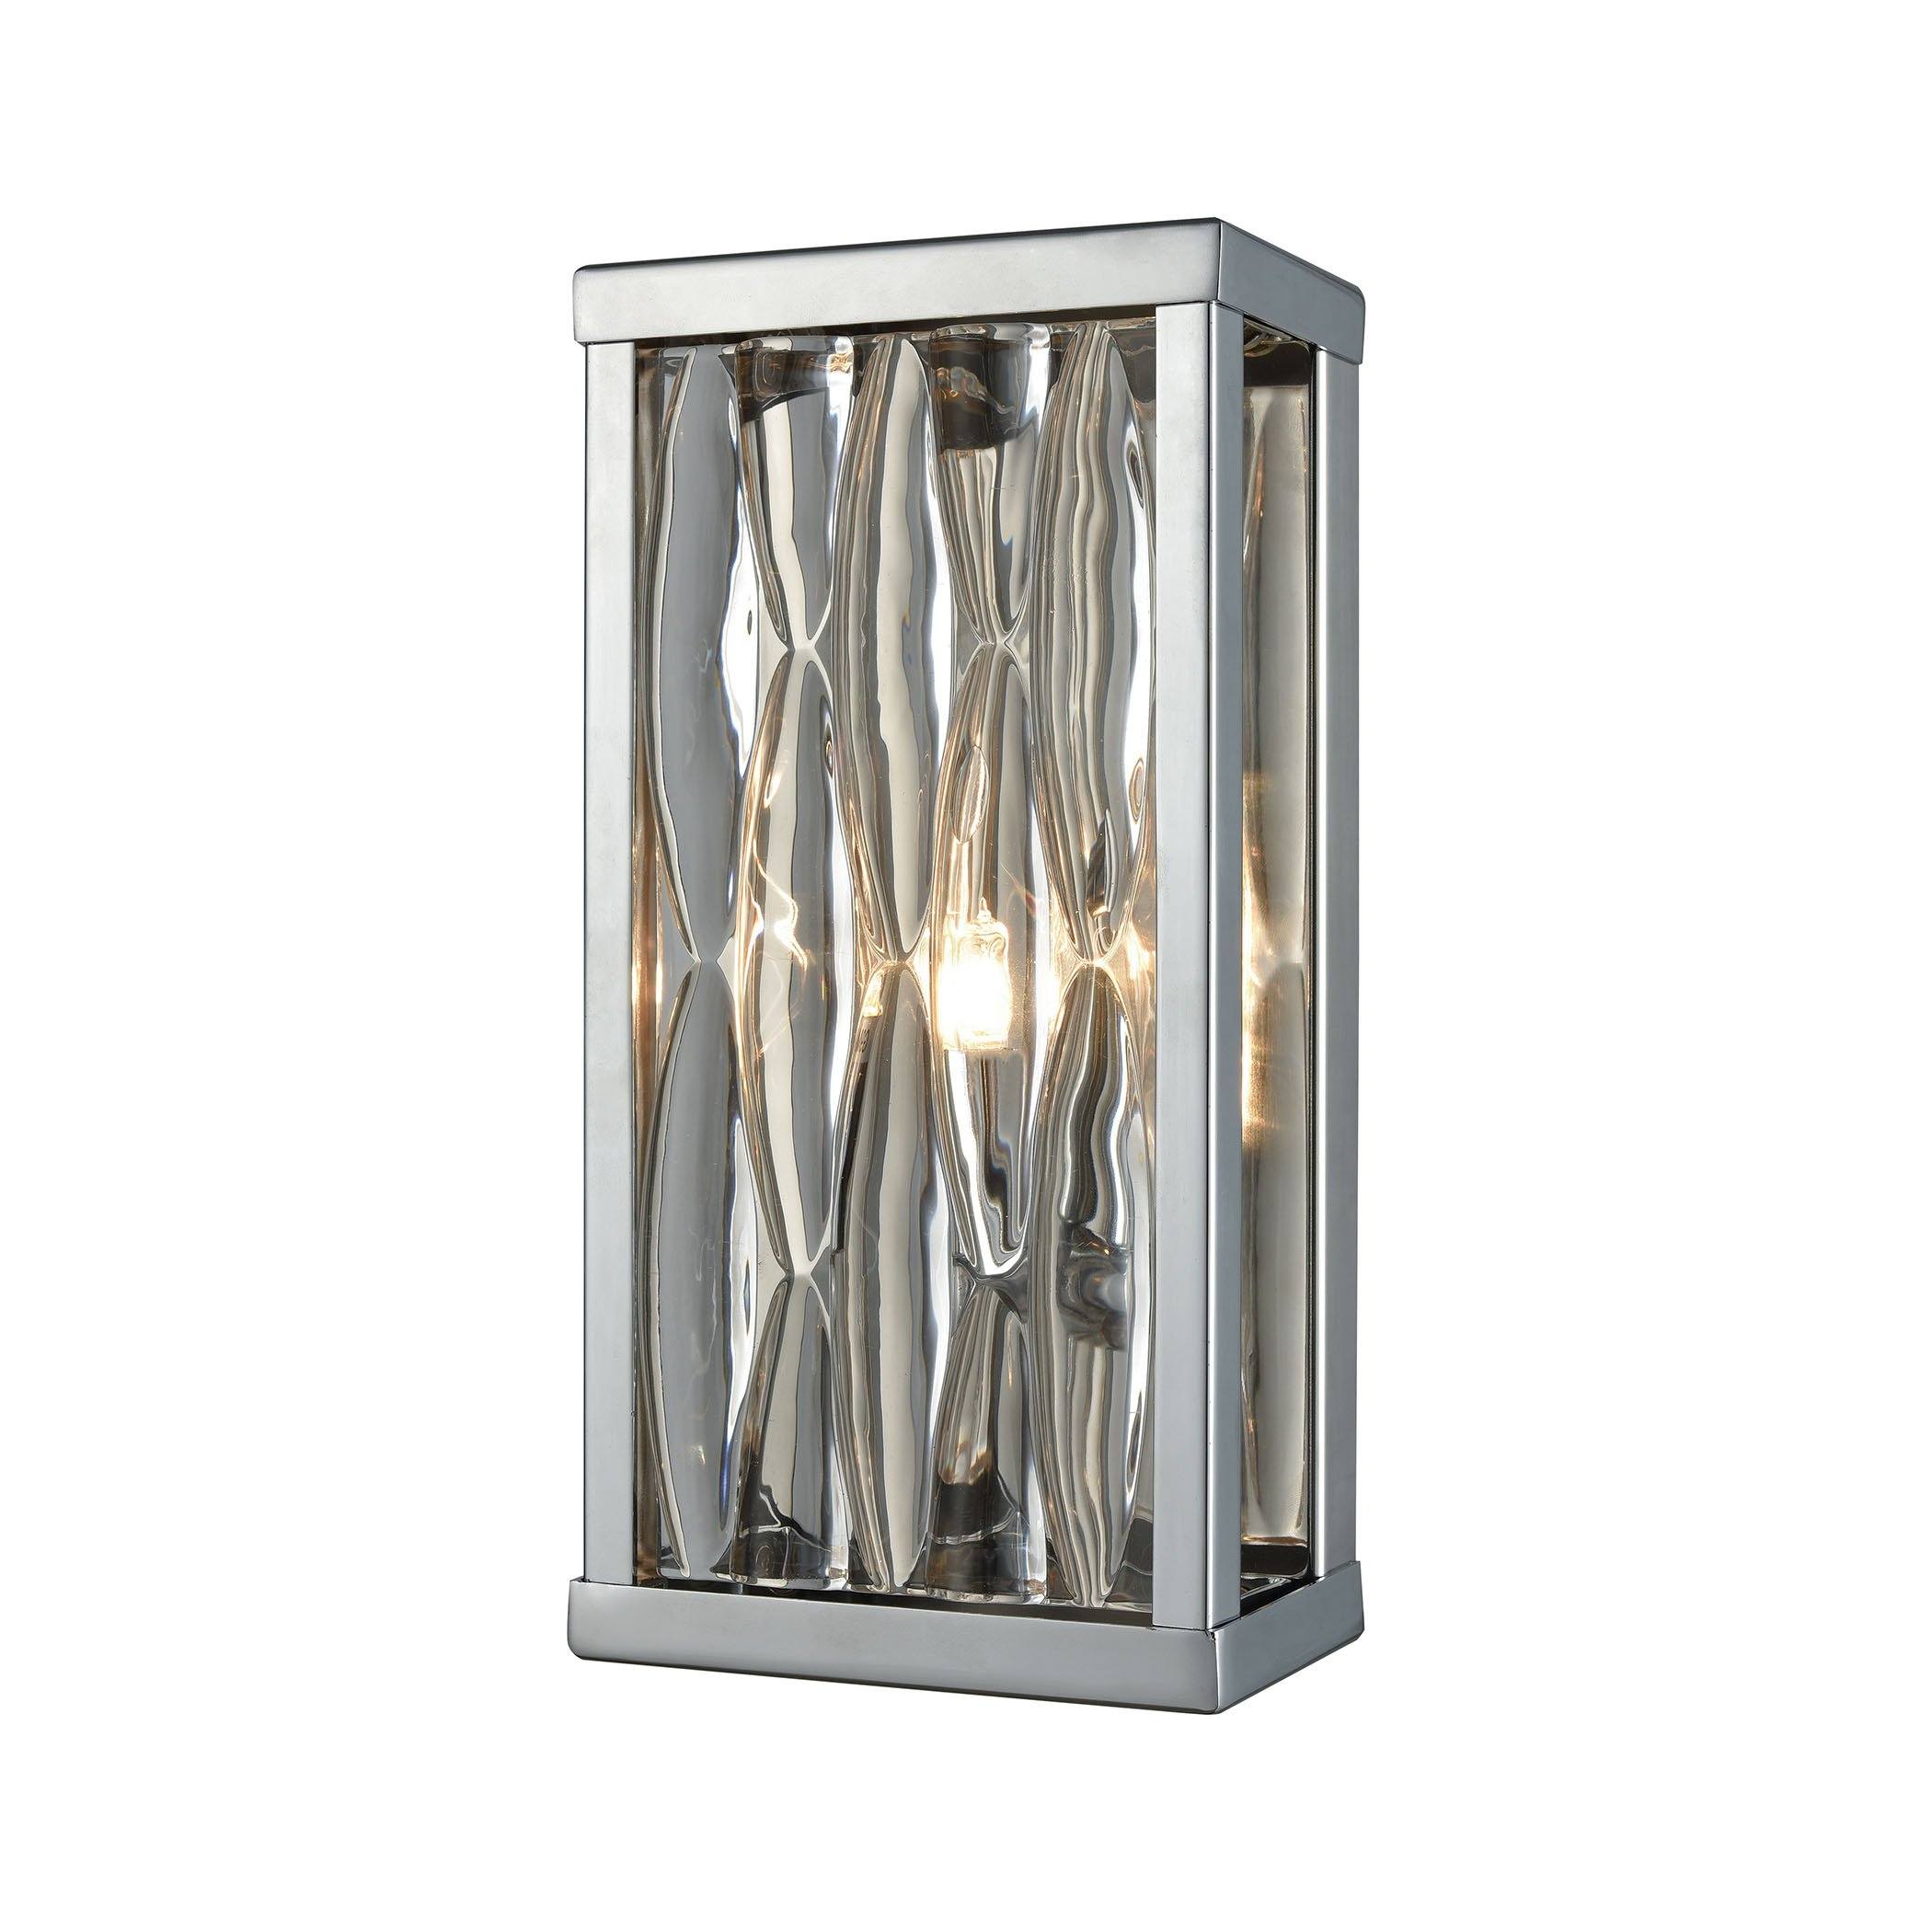 Riverflow 1 Light Vanity In Polished Chrome With Stacked River Stone Glass Wall Elk Lighting 